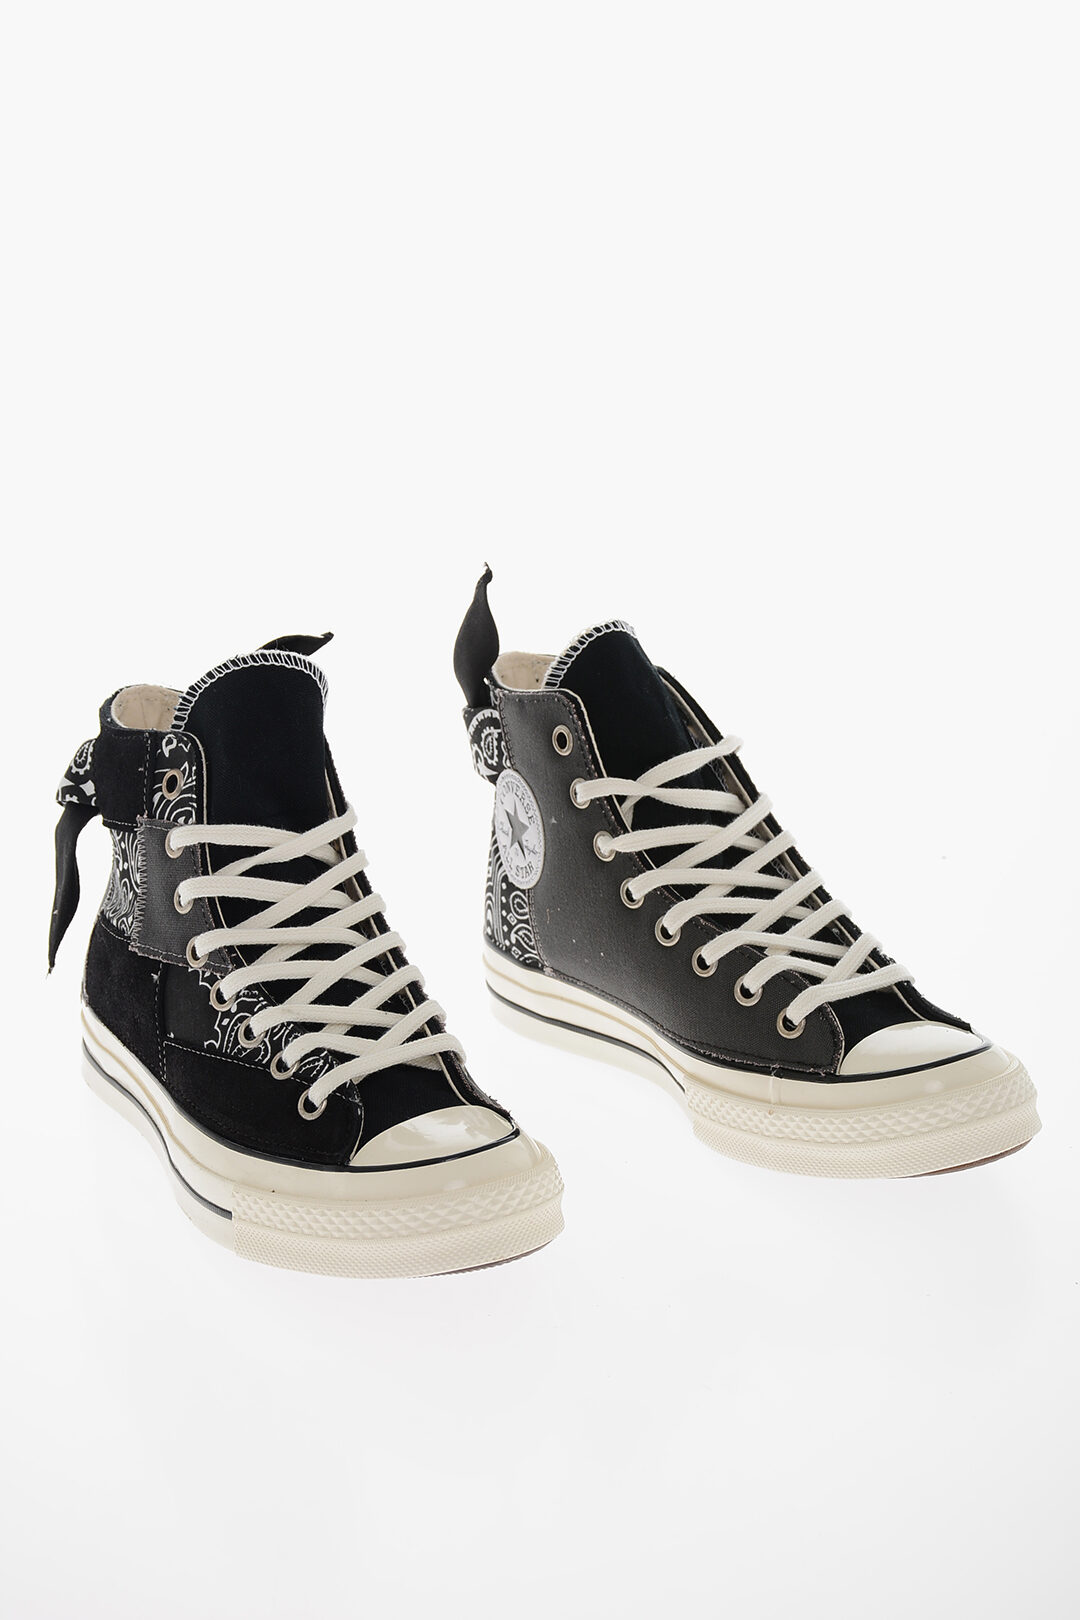 Converse CHUCK TAYLOR ALL STAR Bandana Motif Faux Suede High-Top Sneakers - Glamood Outlet